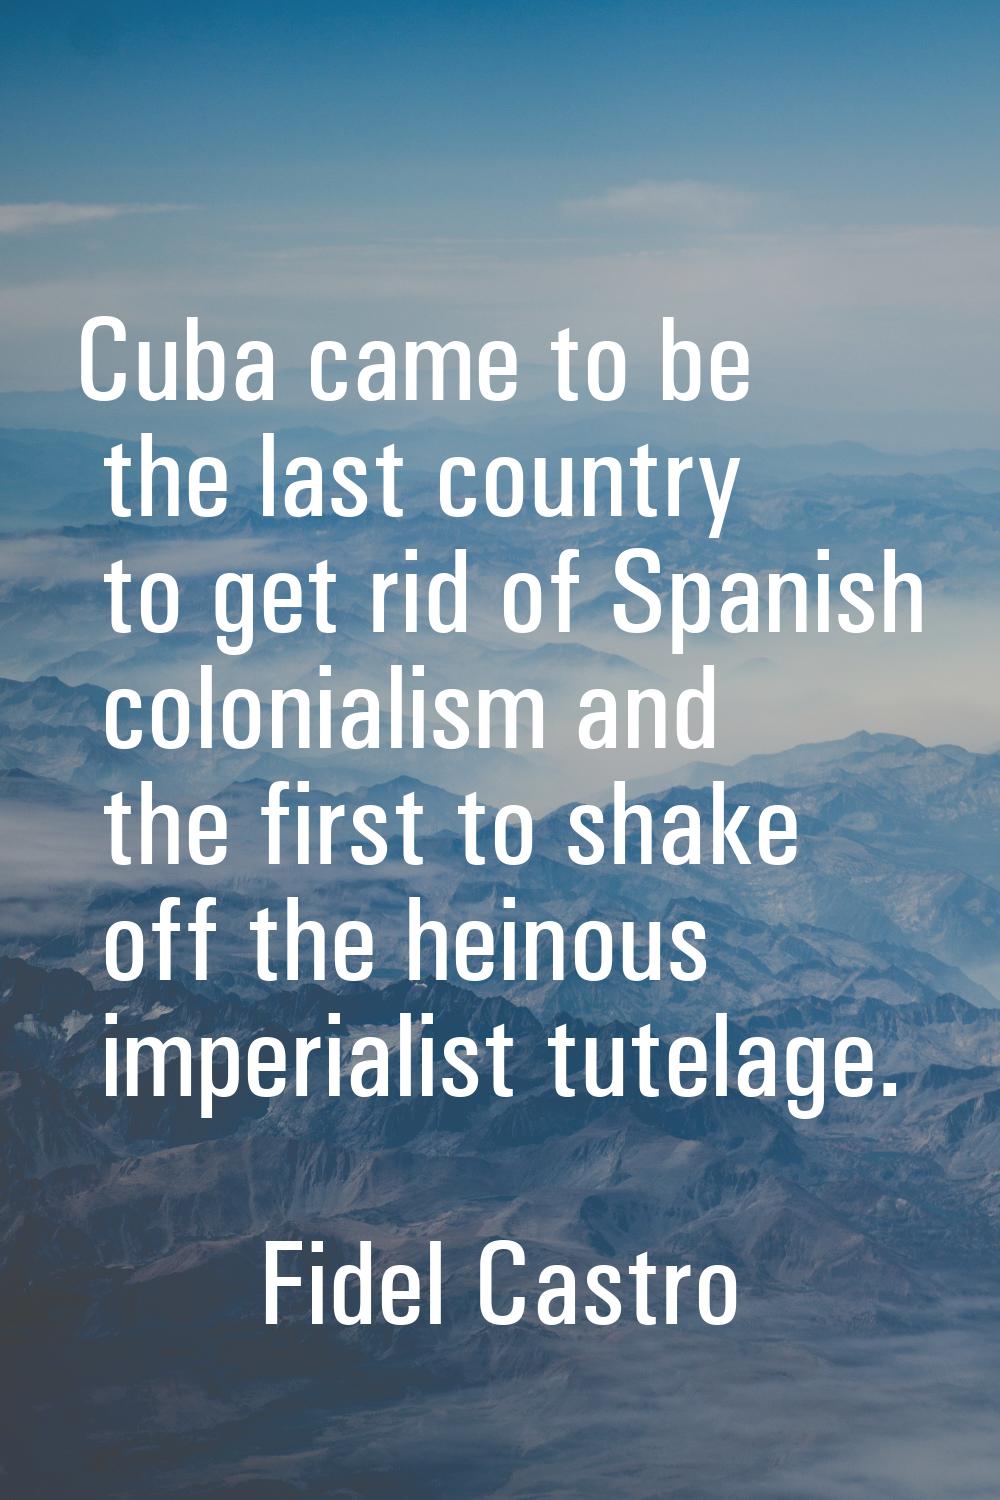 Cuba came to be the last country to get rid of Spanish colonialism and the first to shake off the h